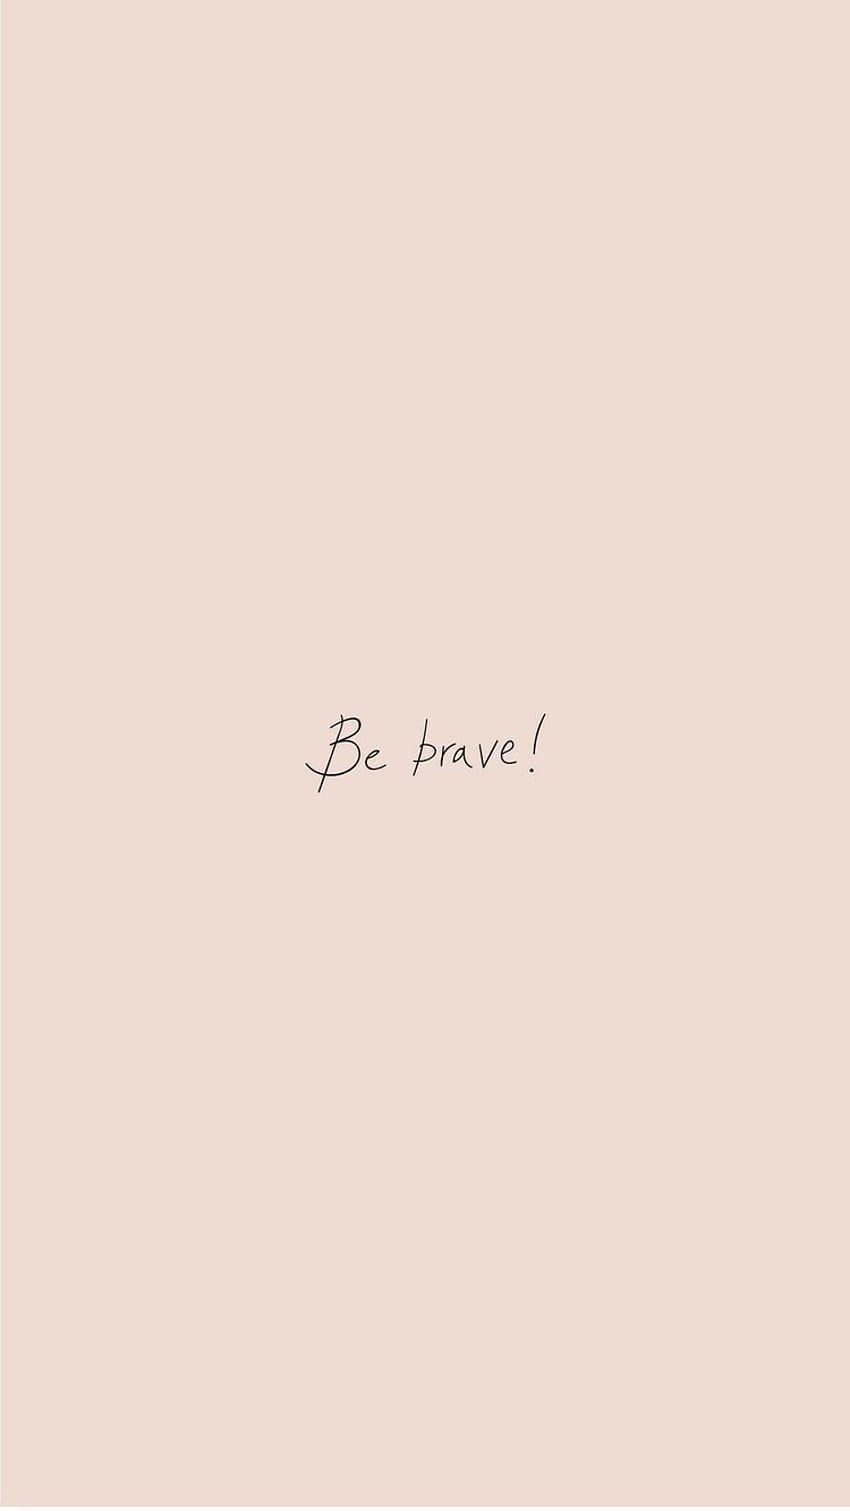 Cute Simple Quote, mobile minimalist quotes HD phone wallpaper